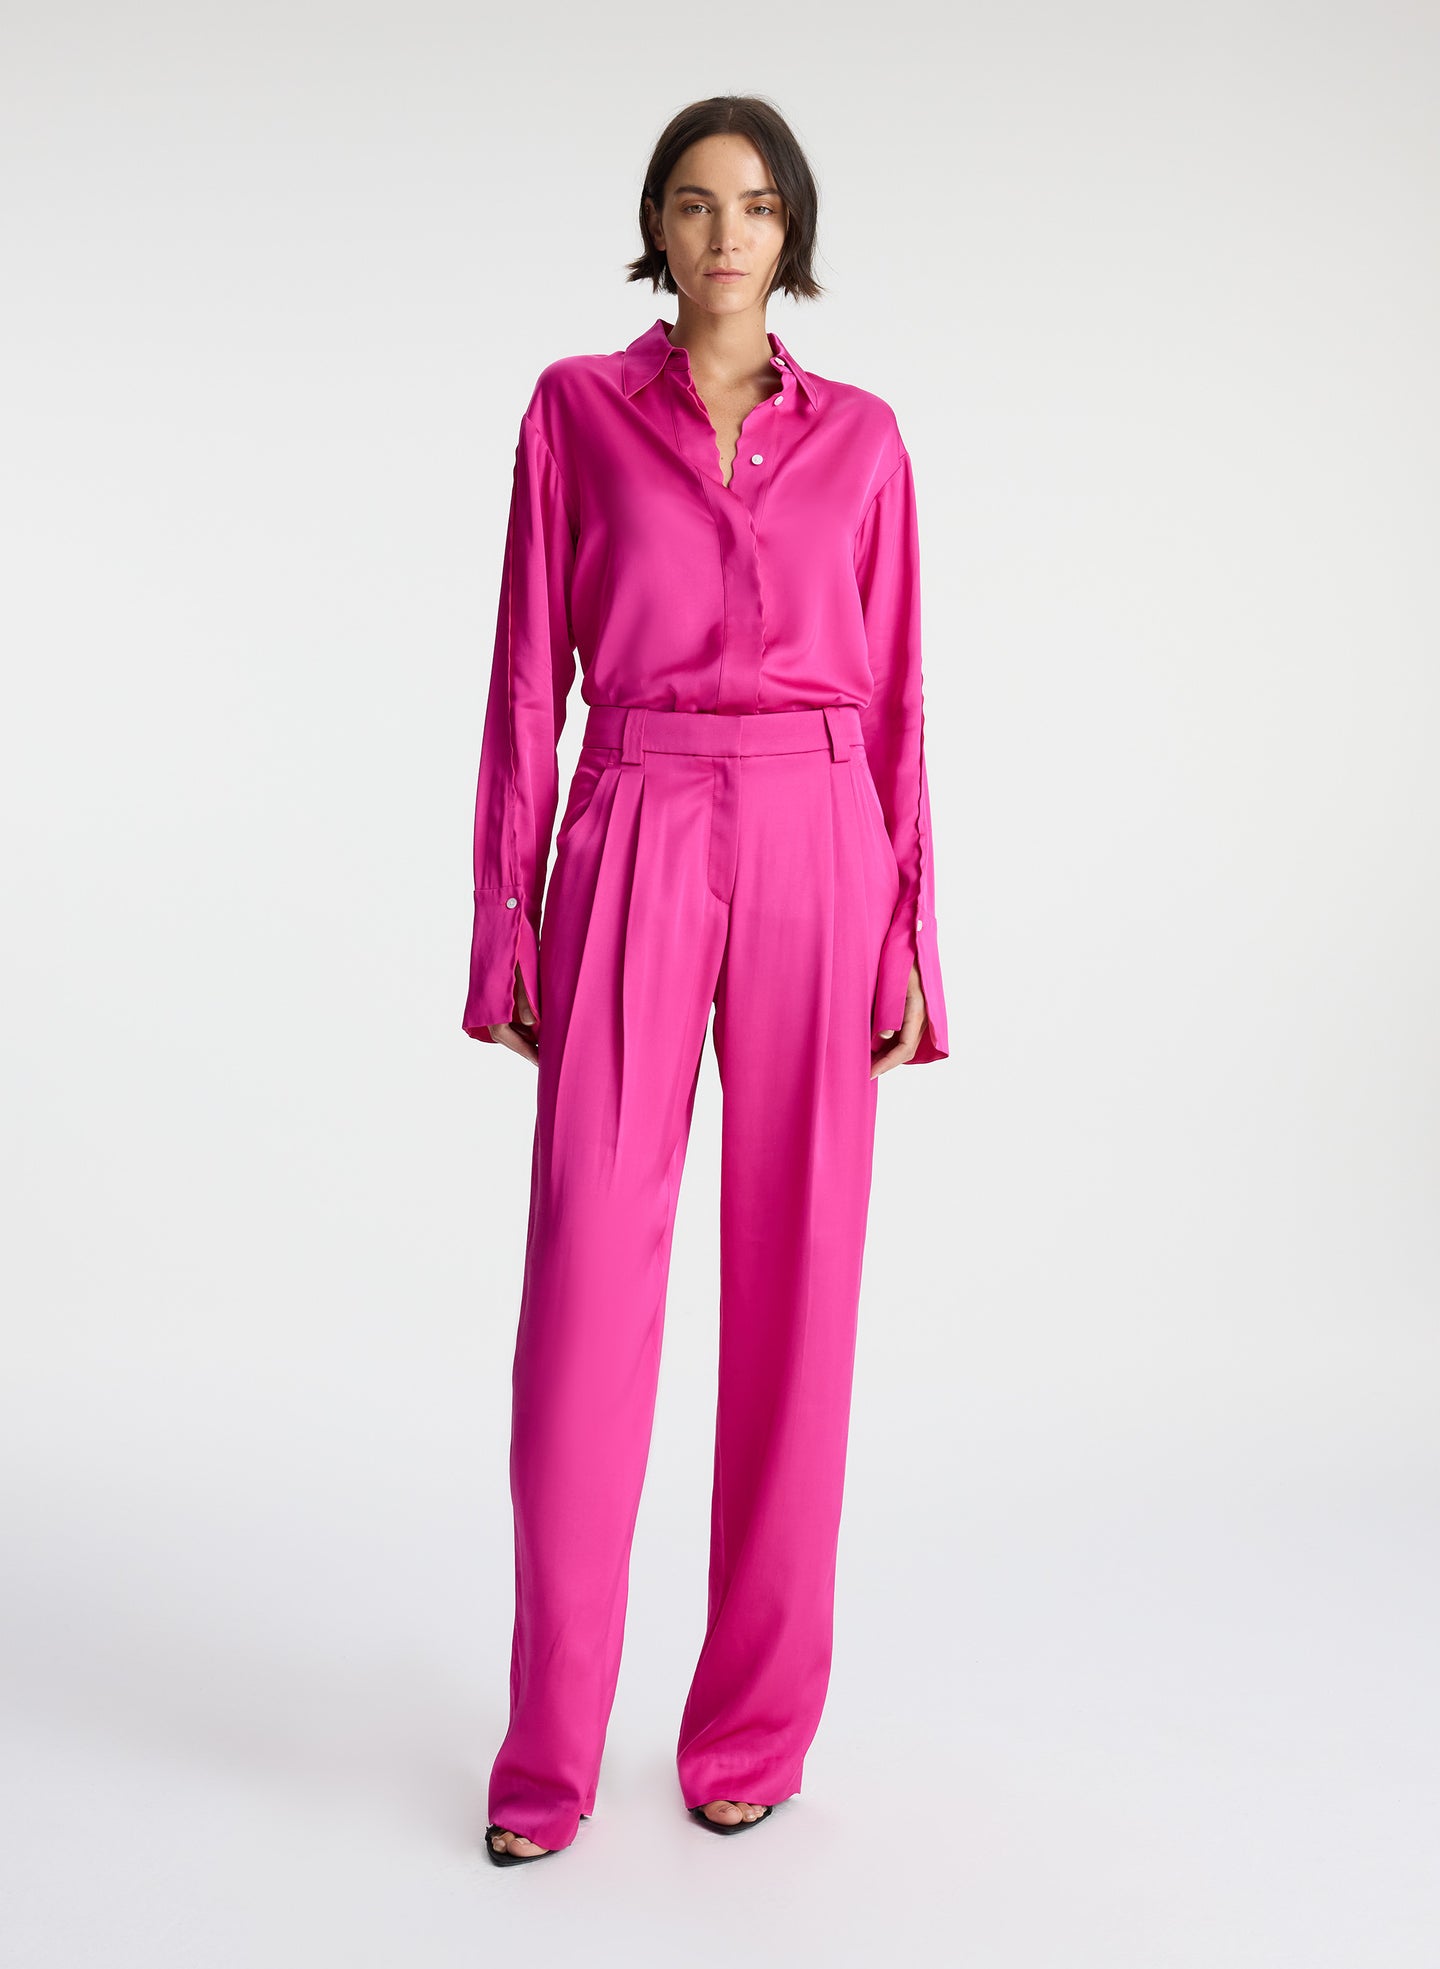 front view of woman wearing pink button down collared satin long sleeve shirt with matching pink satin pants